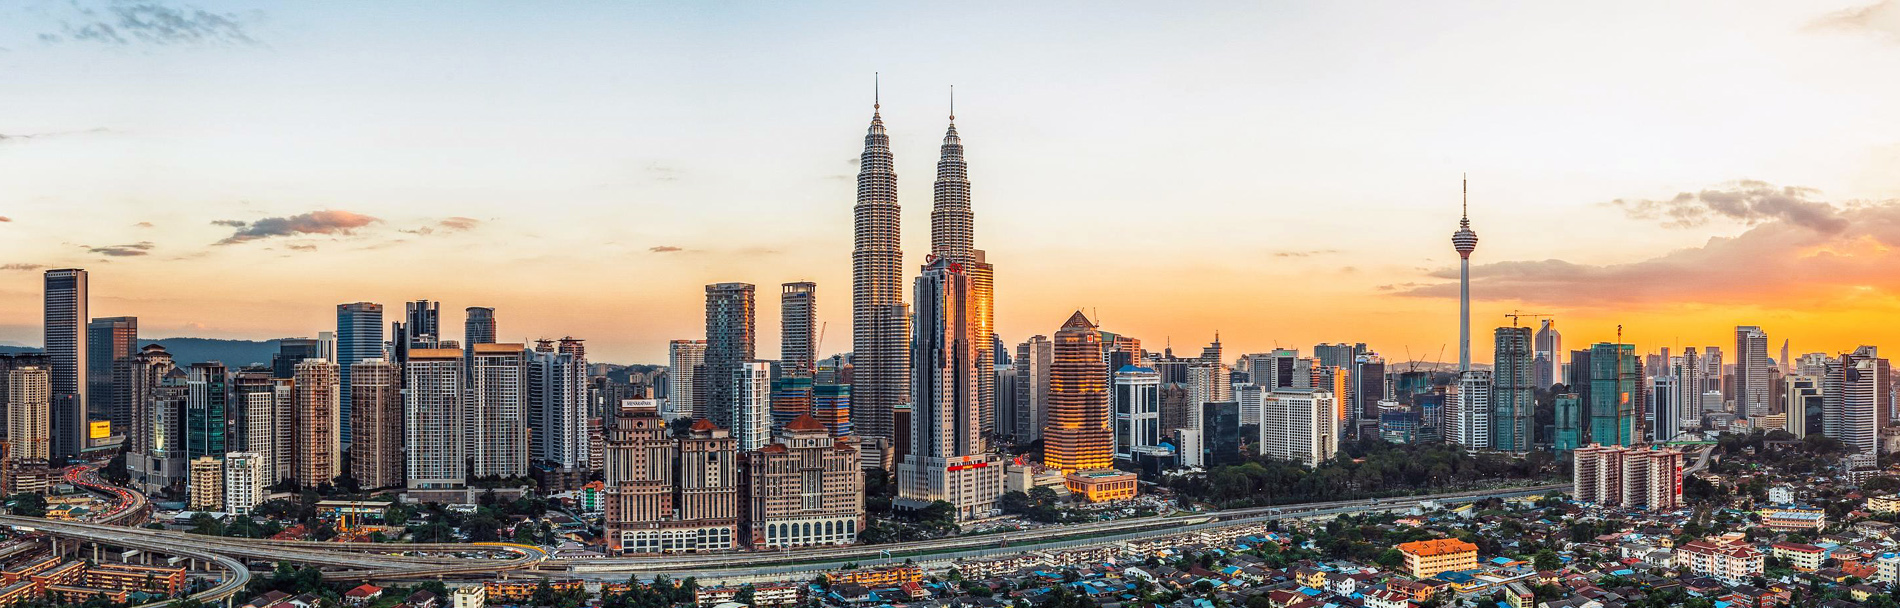 Magical Malaysia Tour Package - 11 Nights